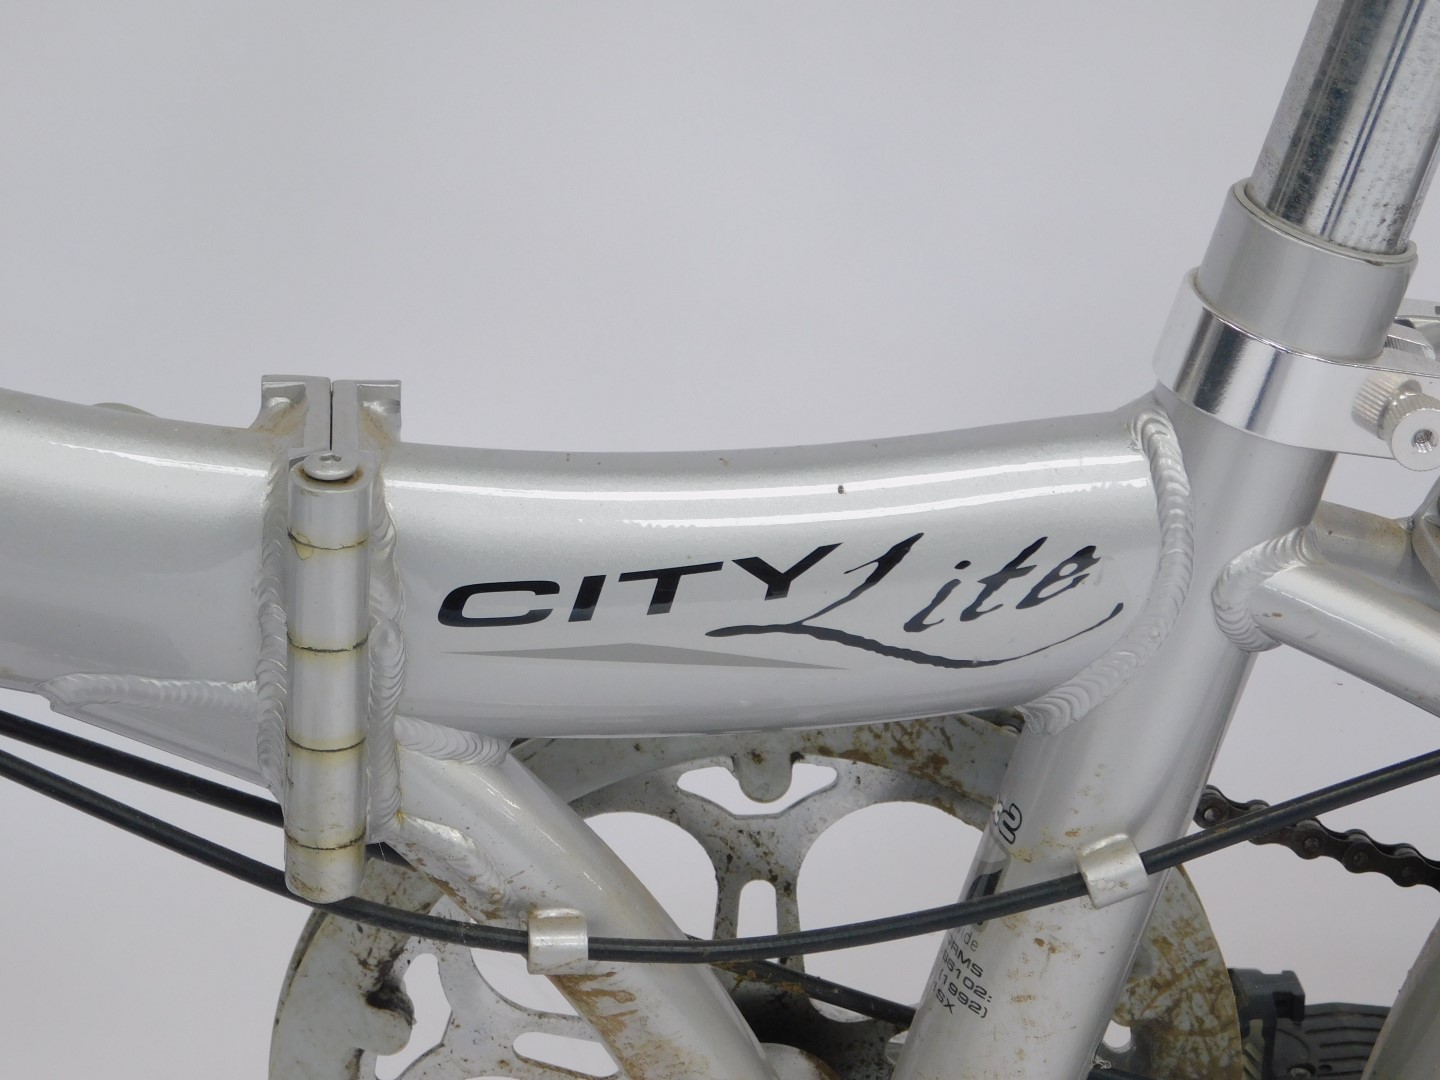 A City Lite Land Rover folding bicycle. - Image 3 of 5